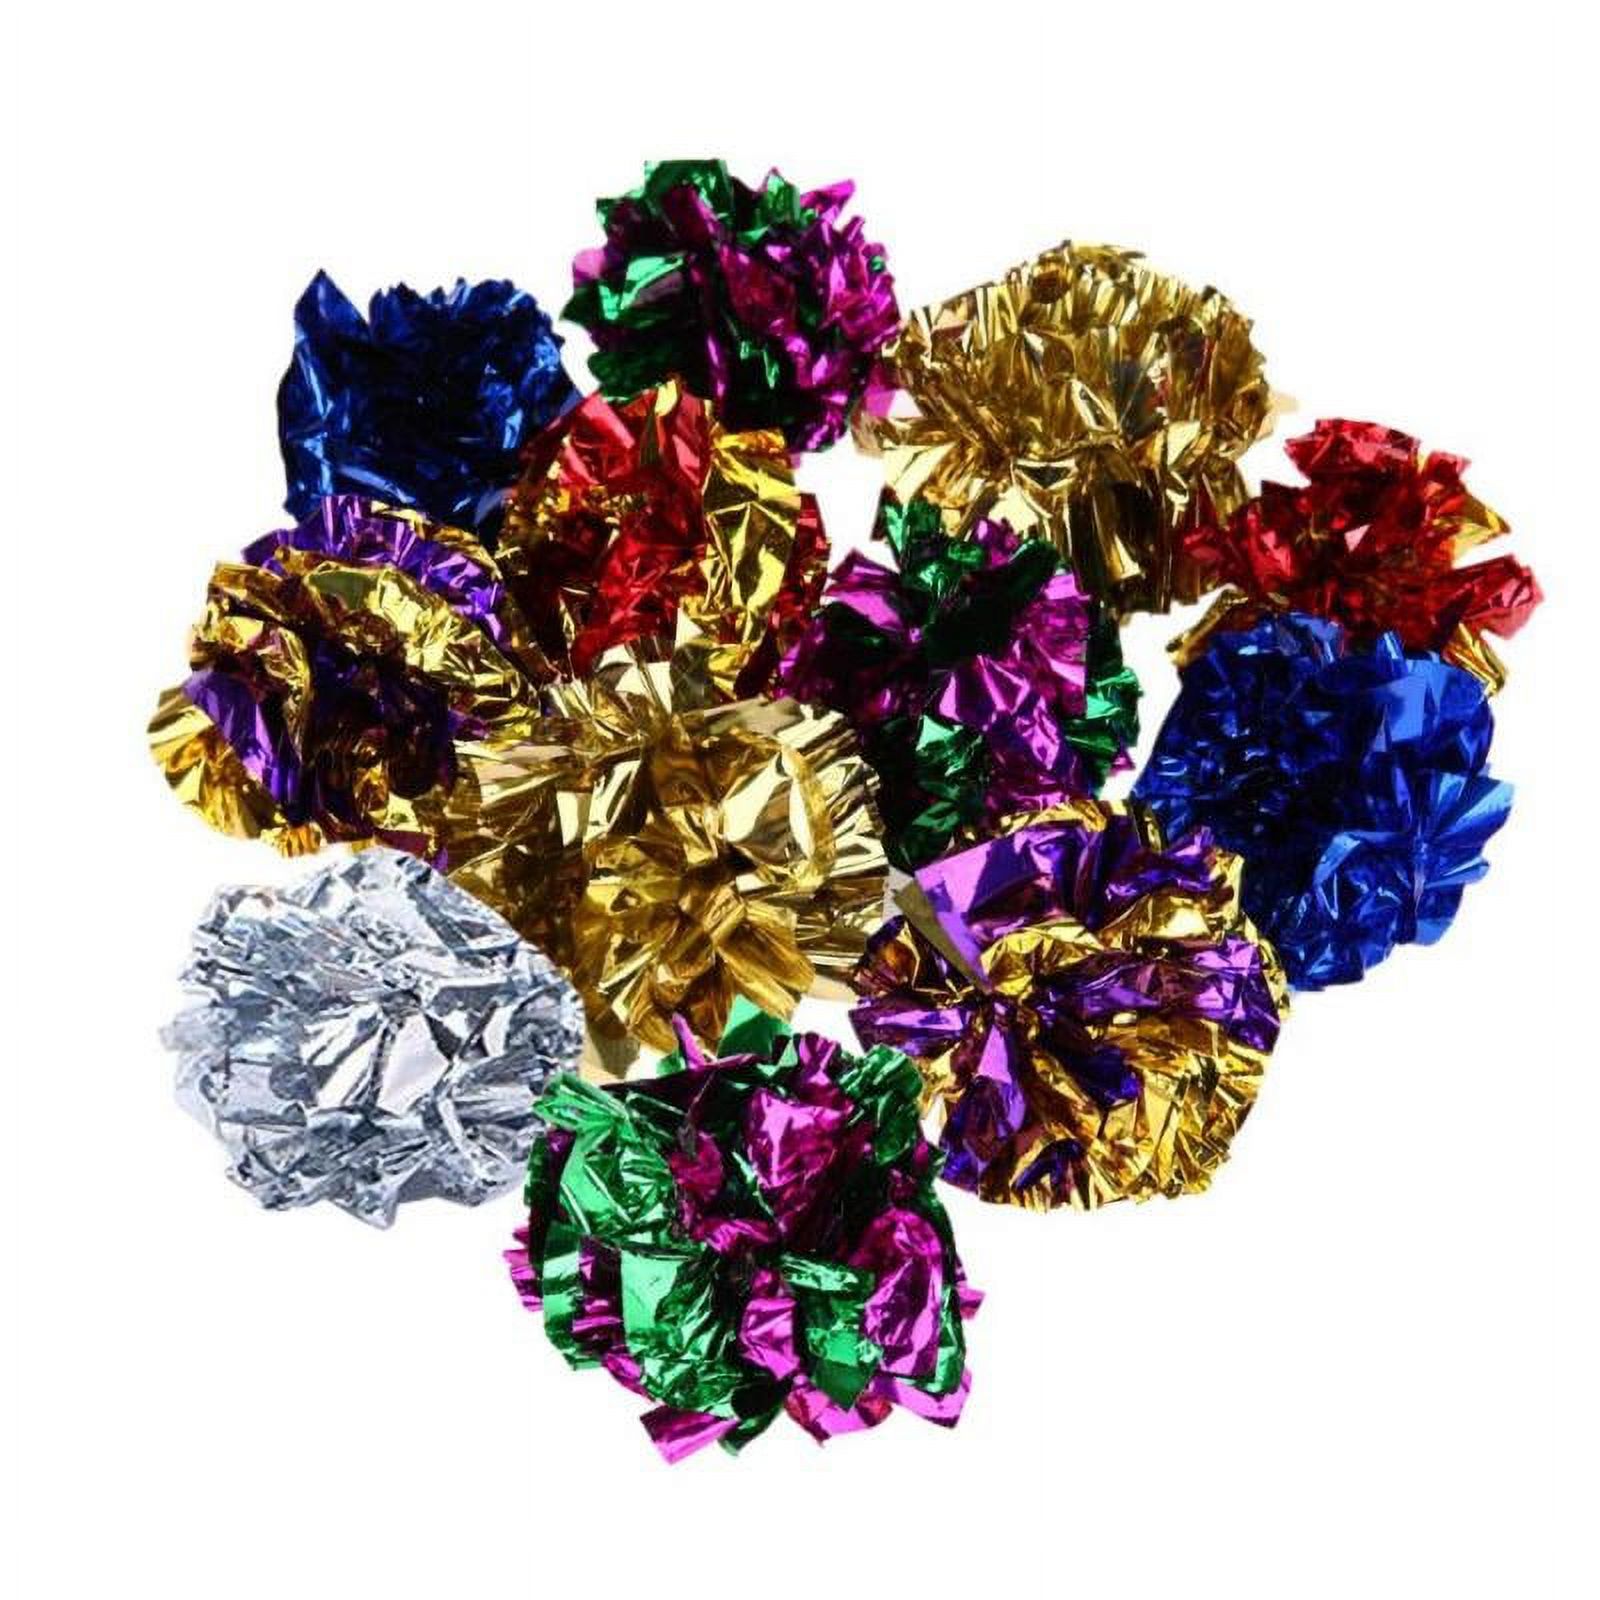 Pack of 12 Colorful Crinkle Foil Balls -Cat Interactive Toy Cat Sound Paper Mylar Balls - image 1 of 6